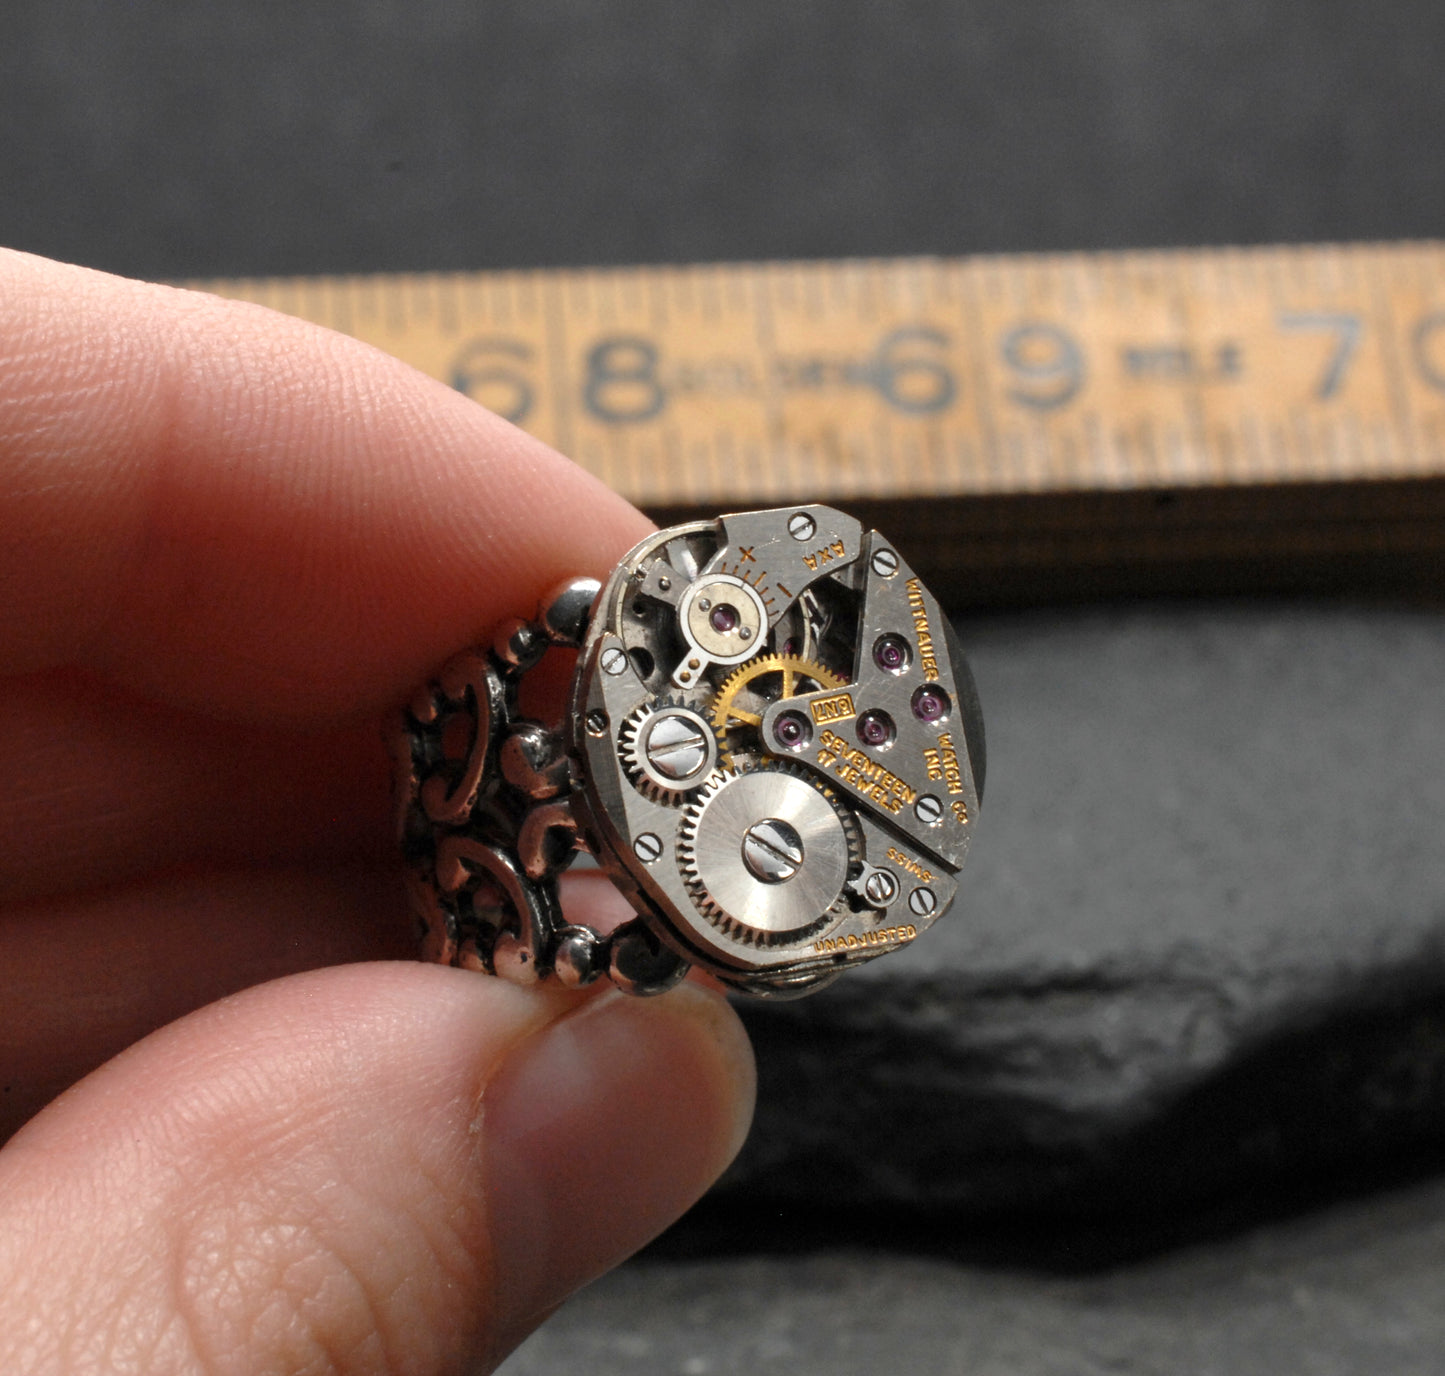 Personalized Steam Punk Ring in Antique Brass, Customize Your Crystal Colors For This Industrial Steampunk Watch Ring Jewelry